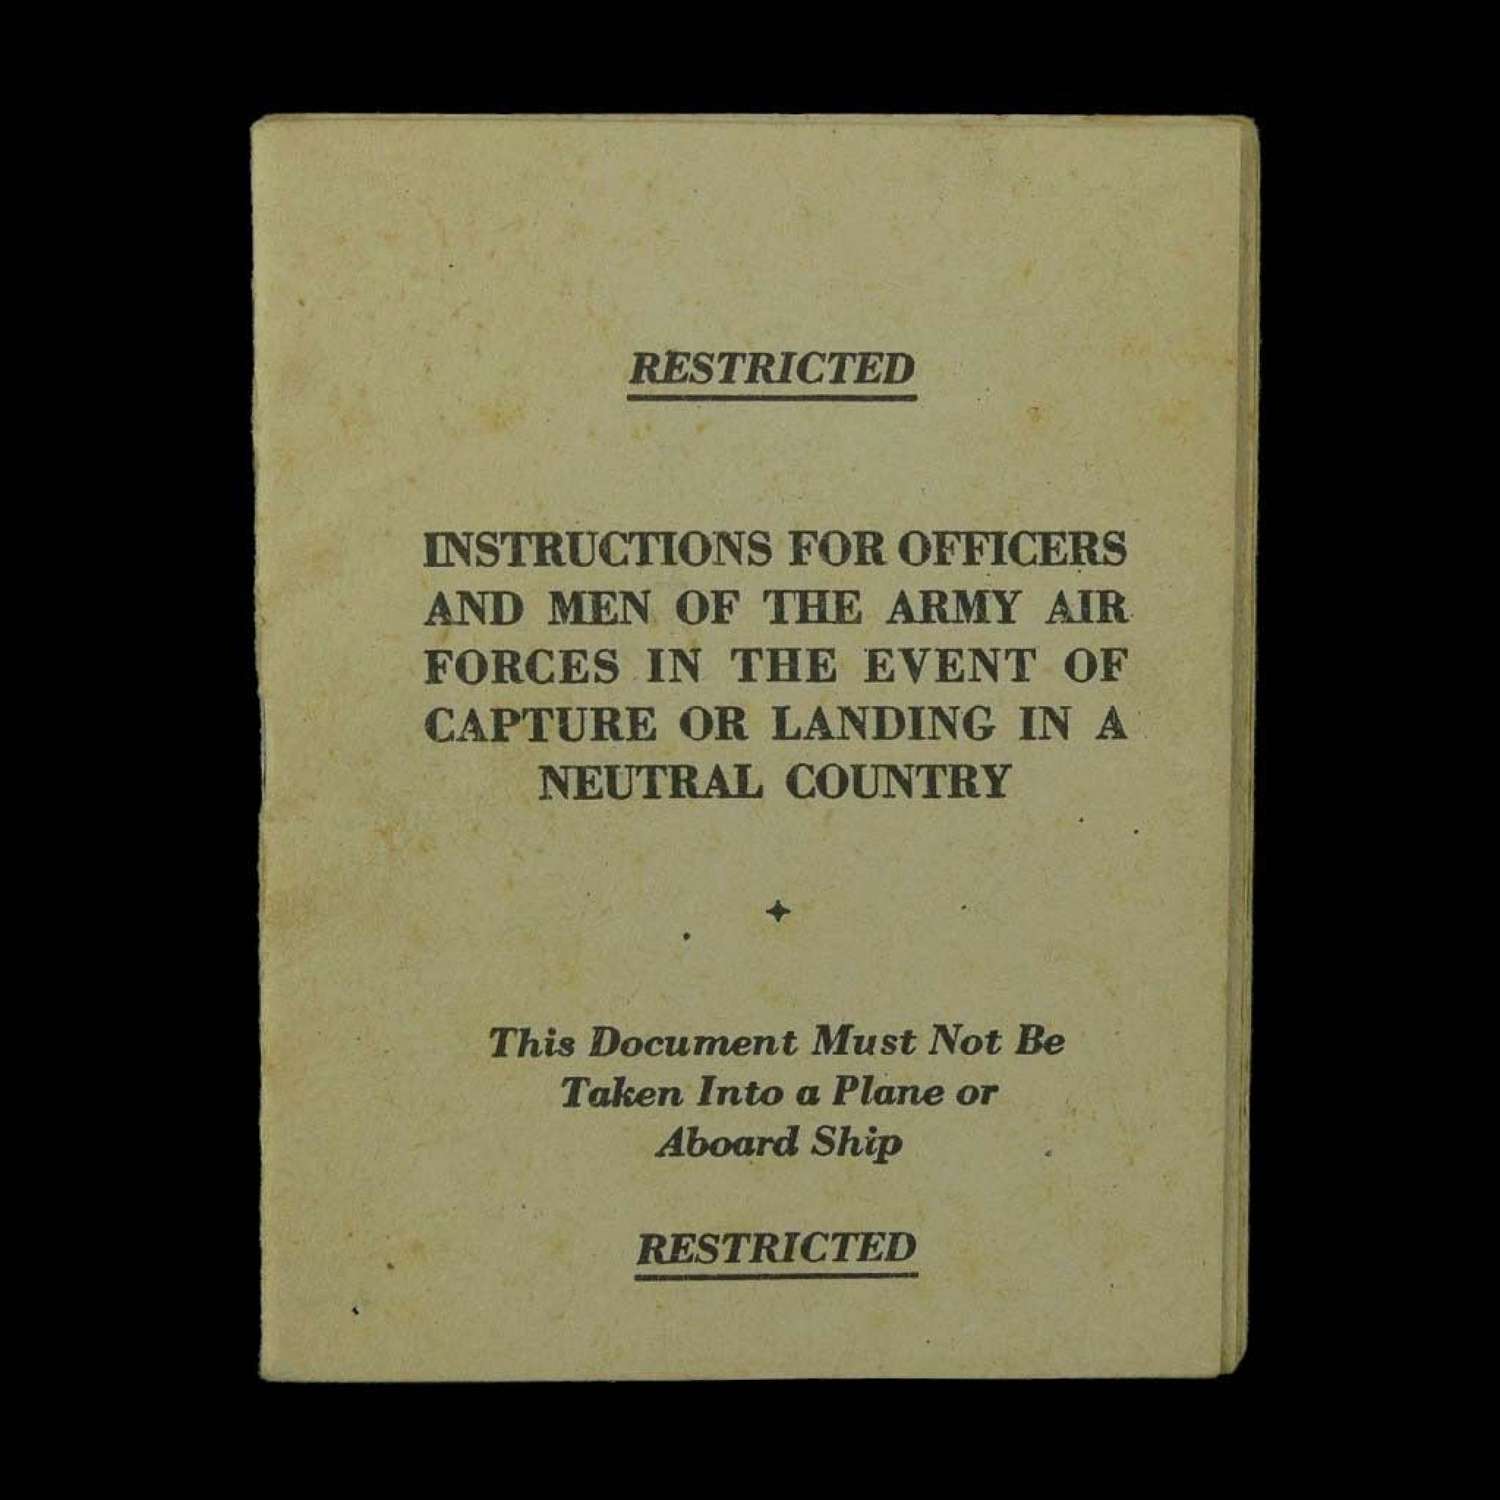 USAAF instructions for aircrew captured/landing in a neutral country